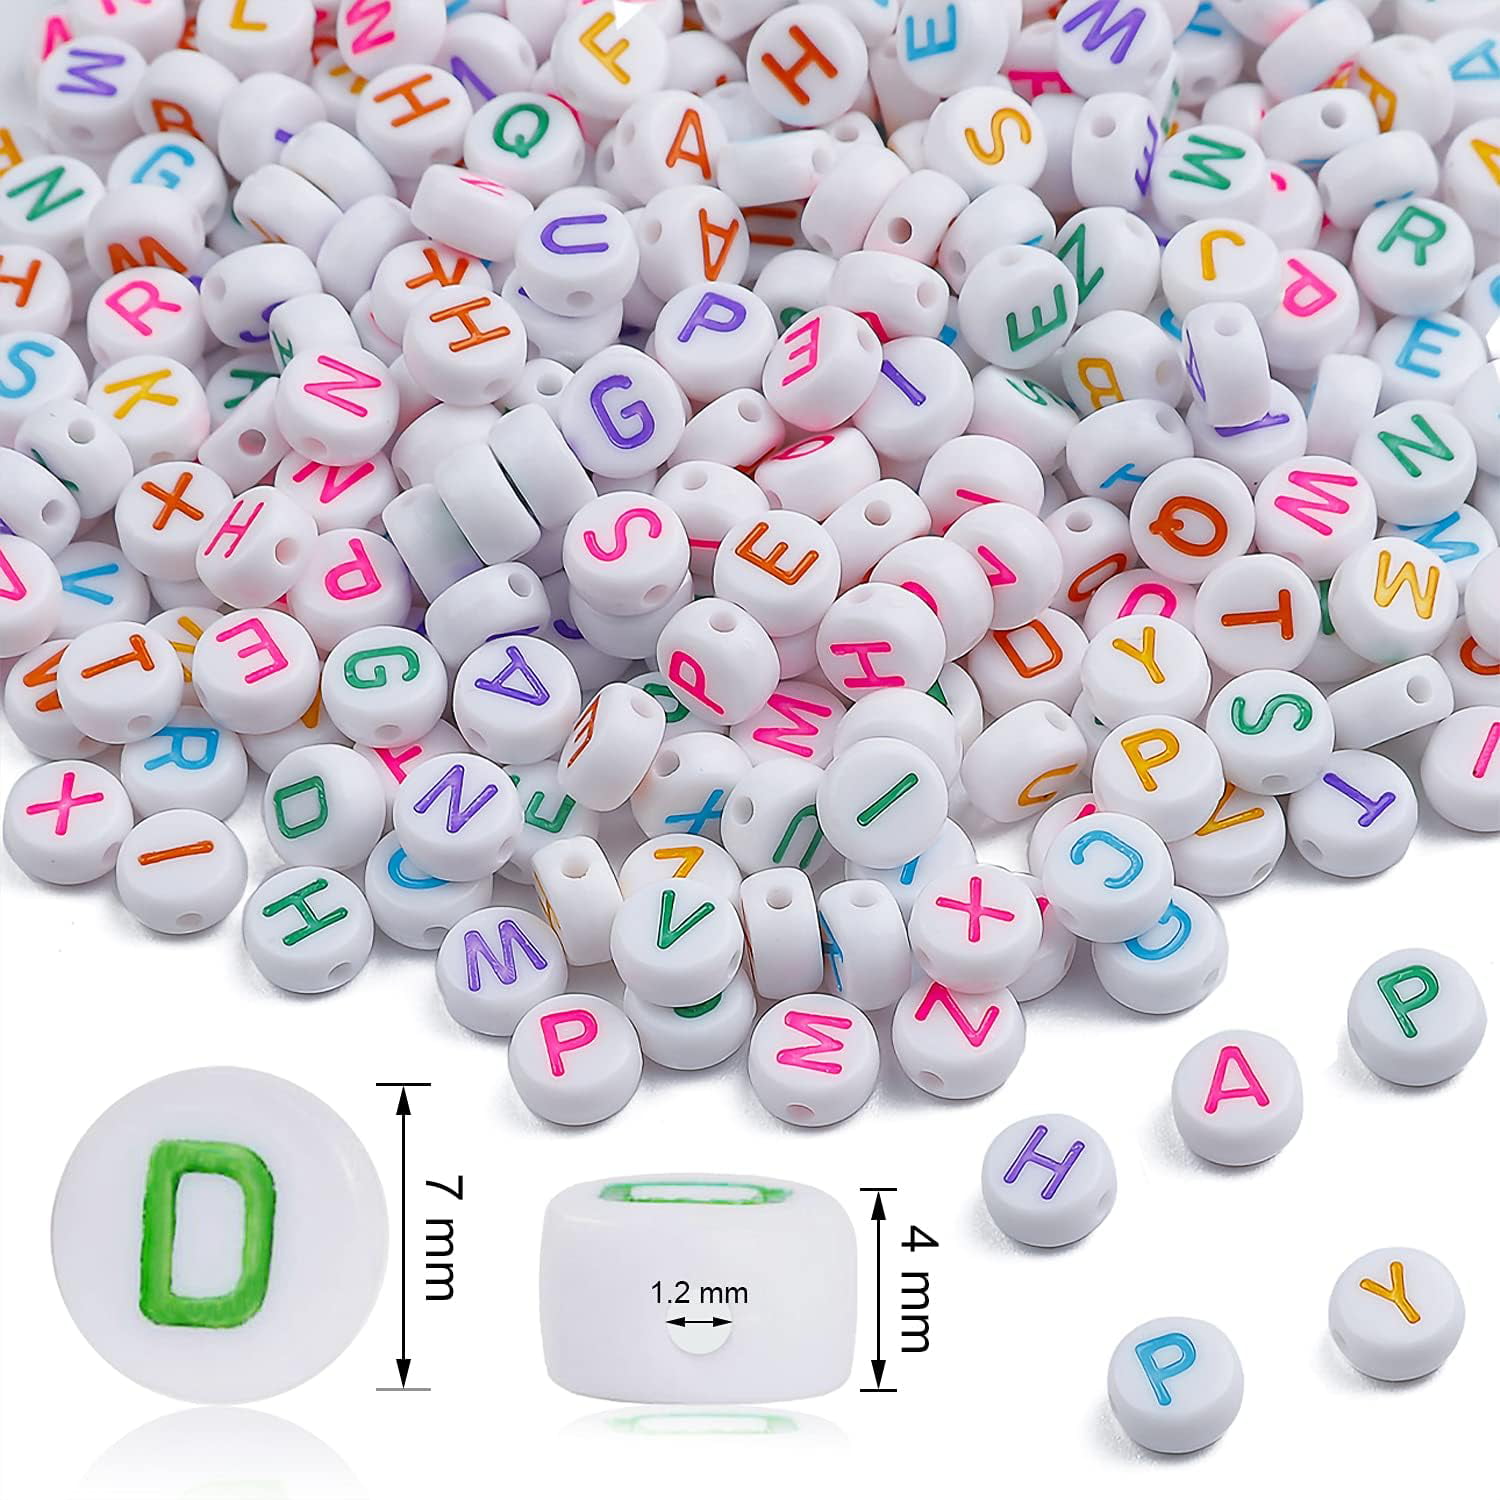 FZIIVQU Letter Beads for Bracelets Making Kit 1260pcs Alphabet Beads for  Jewelry Making Set Lnclude 800pcs 4 Colors 4x7mm Letter Beads and Acrylic  Round Number Heart Smiley Face Beads etc 